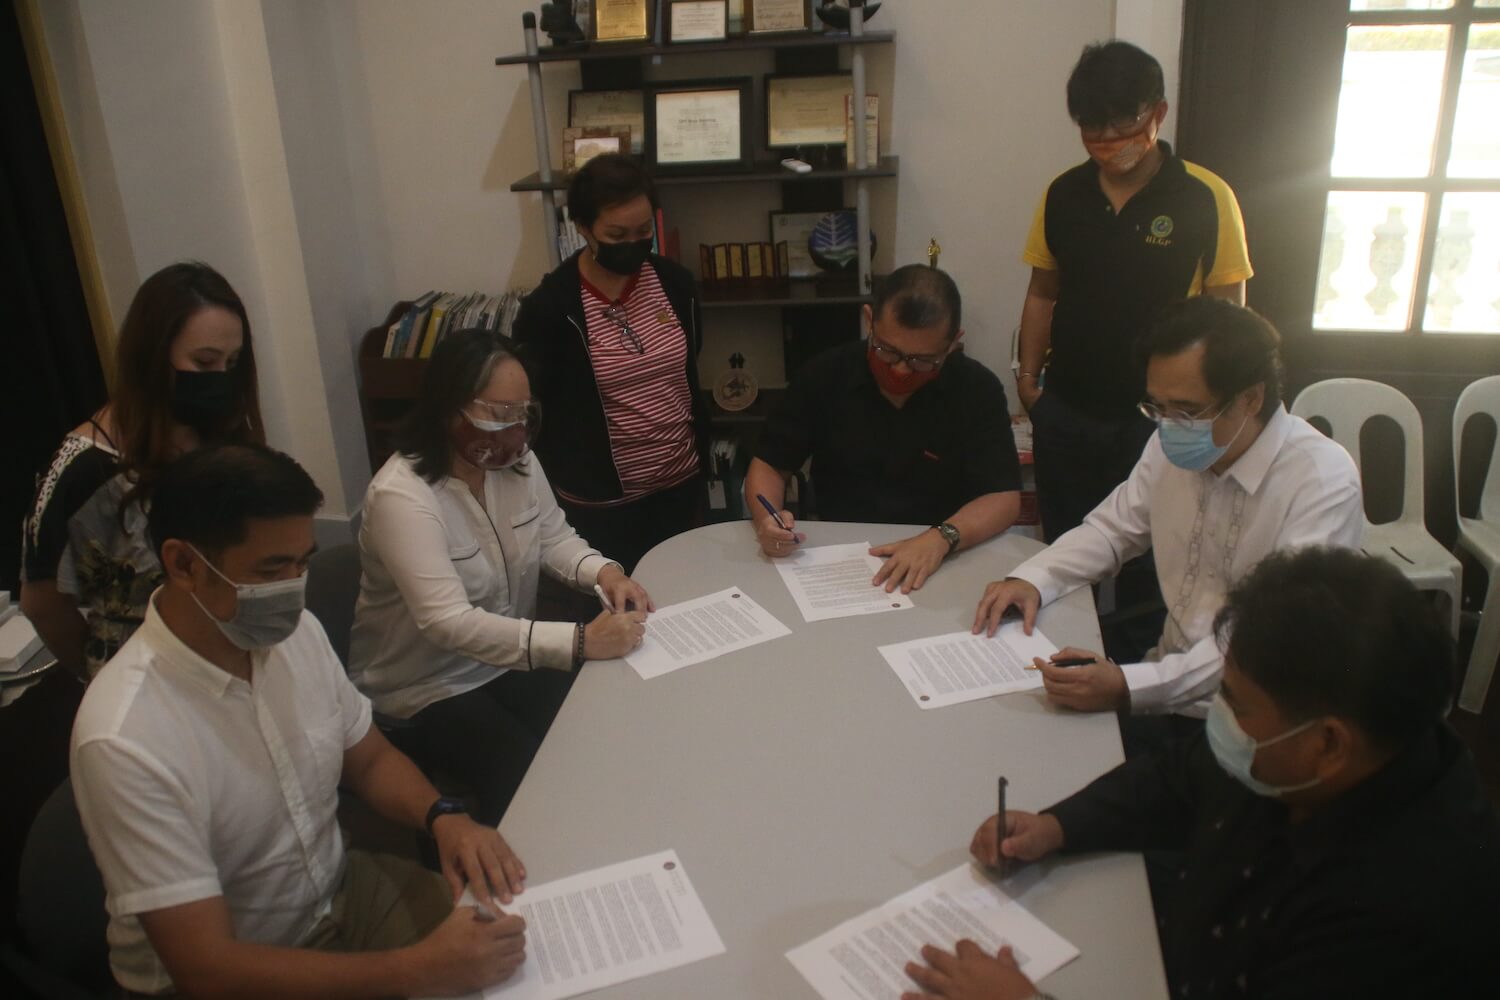 UPV welcomes the creation of voluntary Community Legal Assistance Group